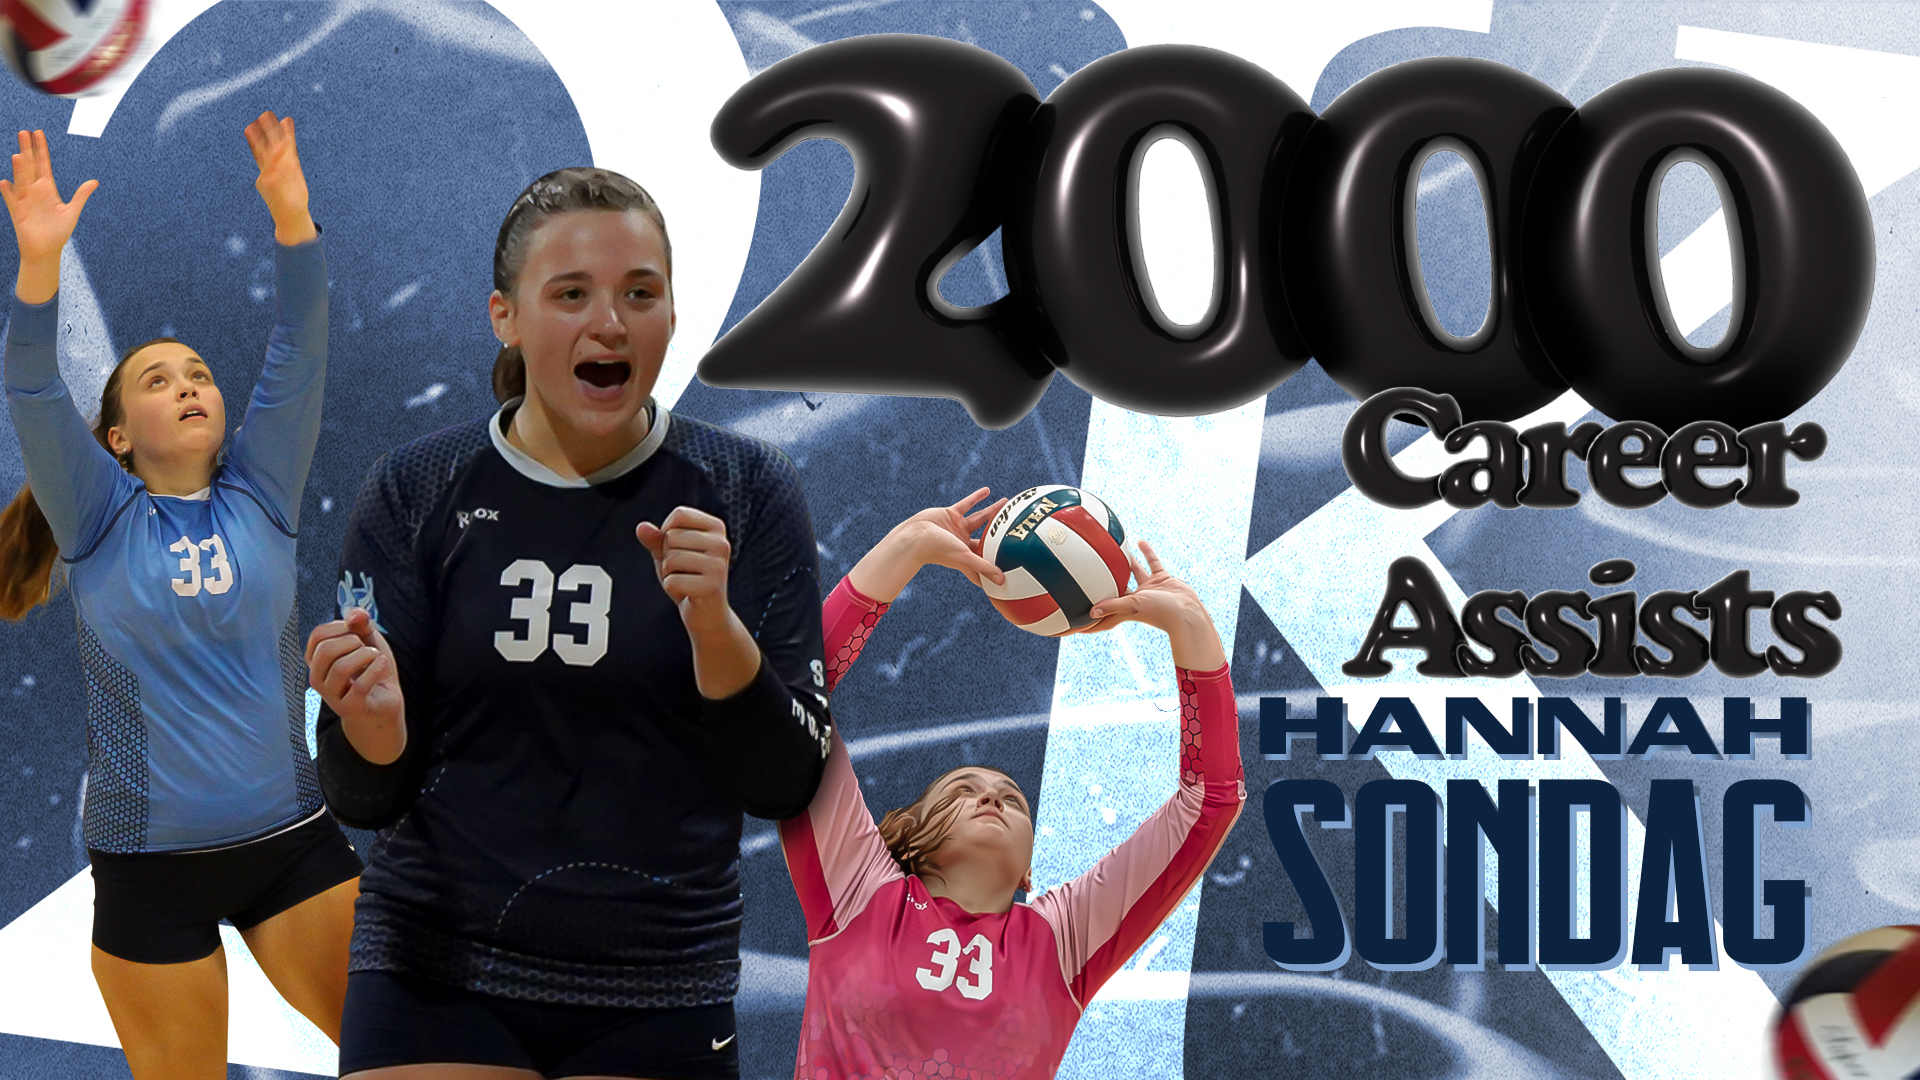 Sondag collects 2000th career assist in win over RedHawks